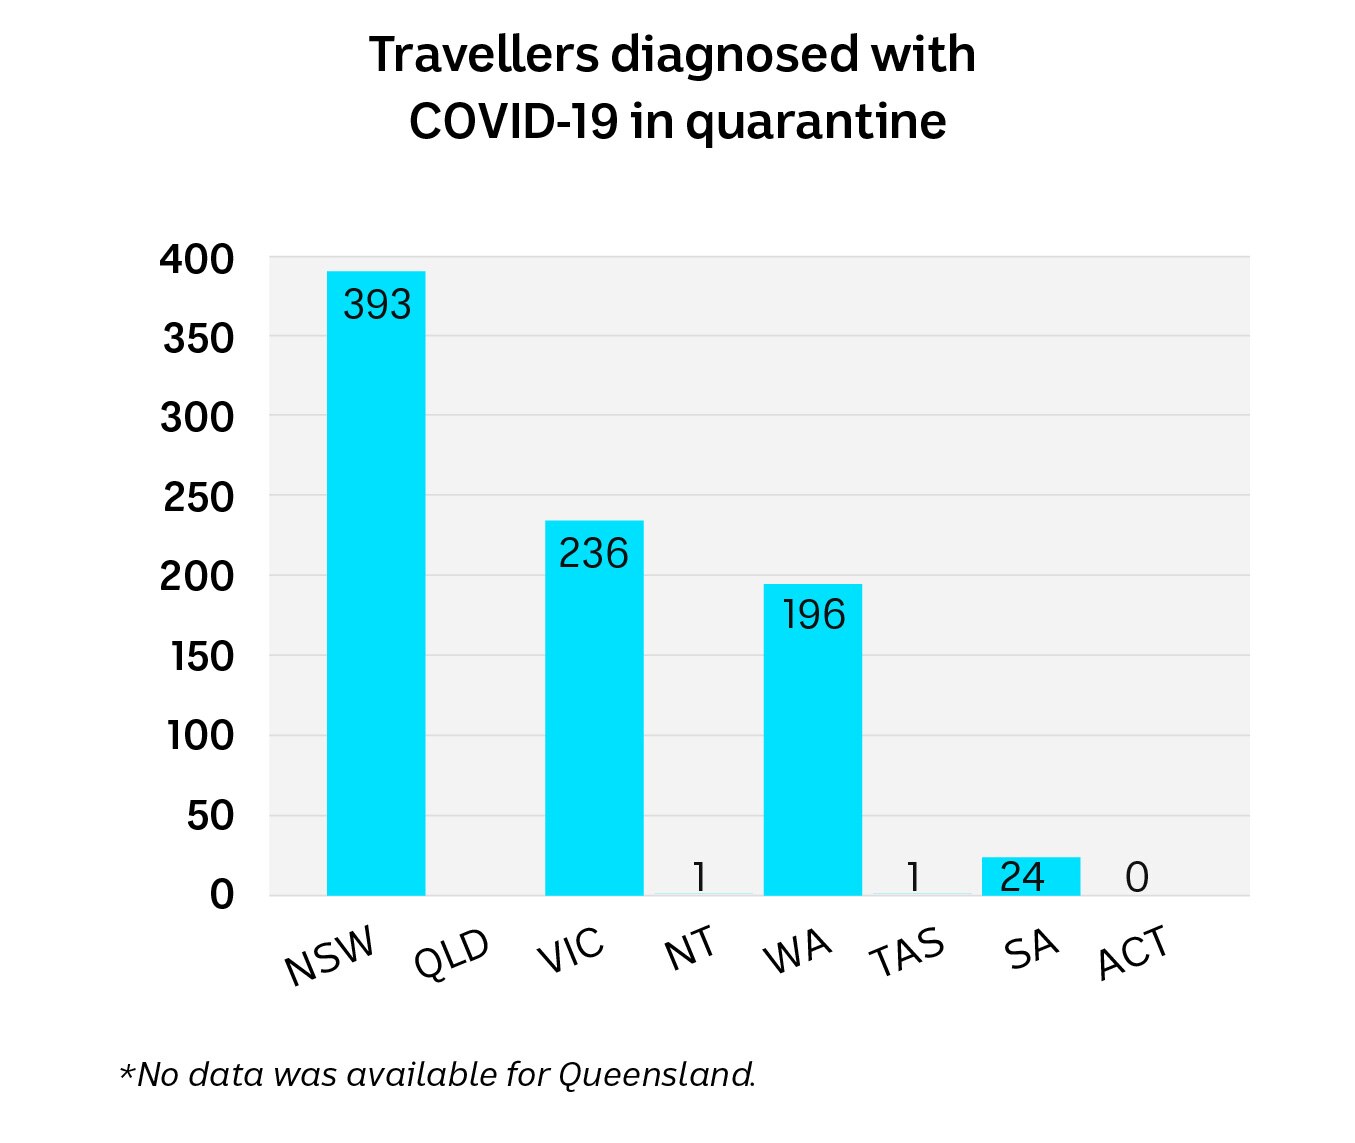 A graph showing, from most to least, how many people have been diagnosed with covid-19 in quarantine in each state